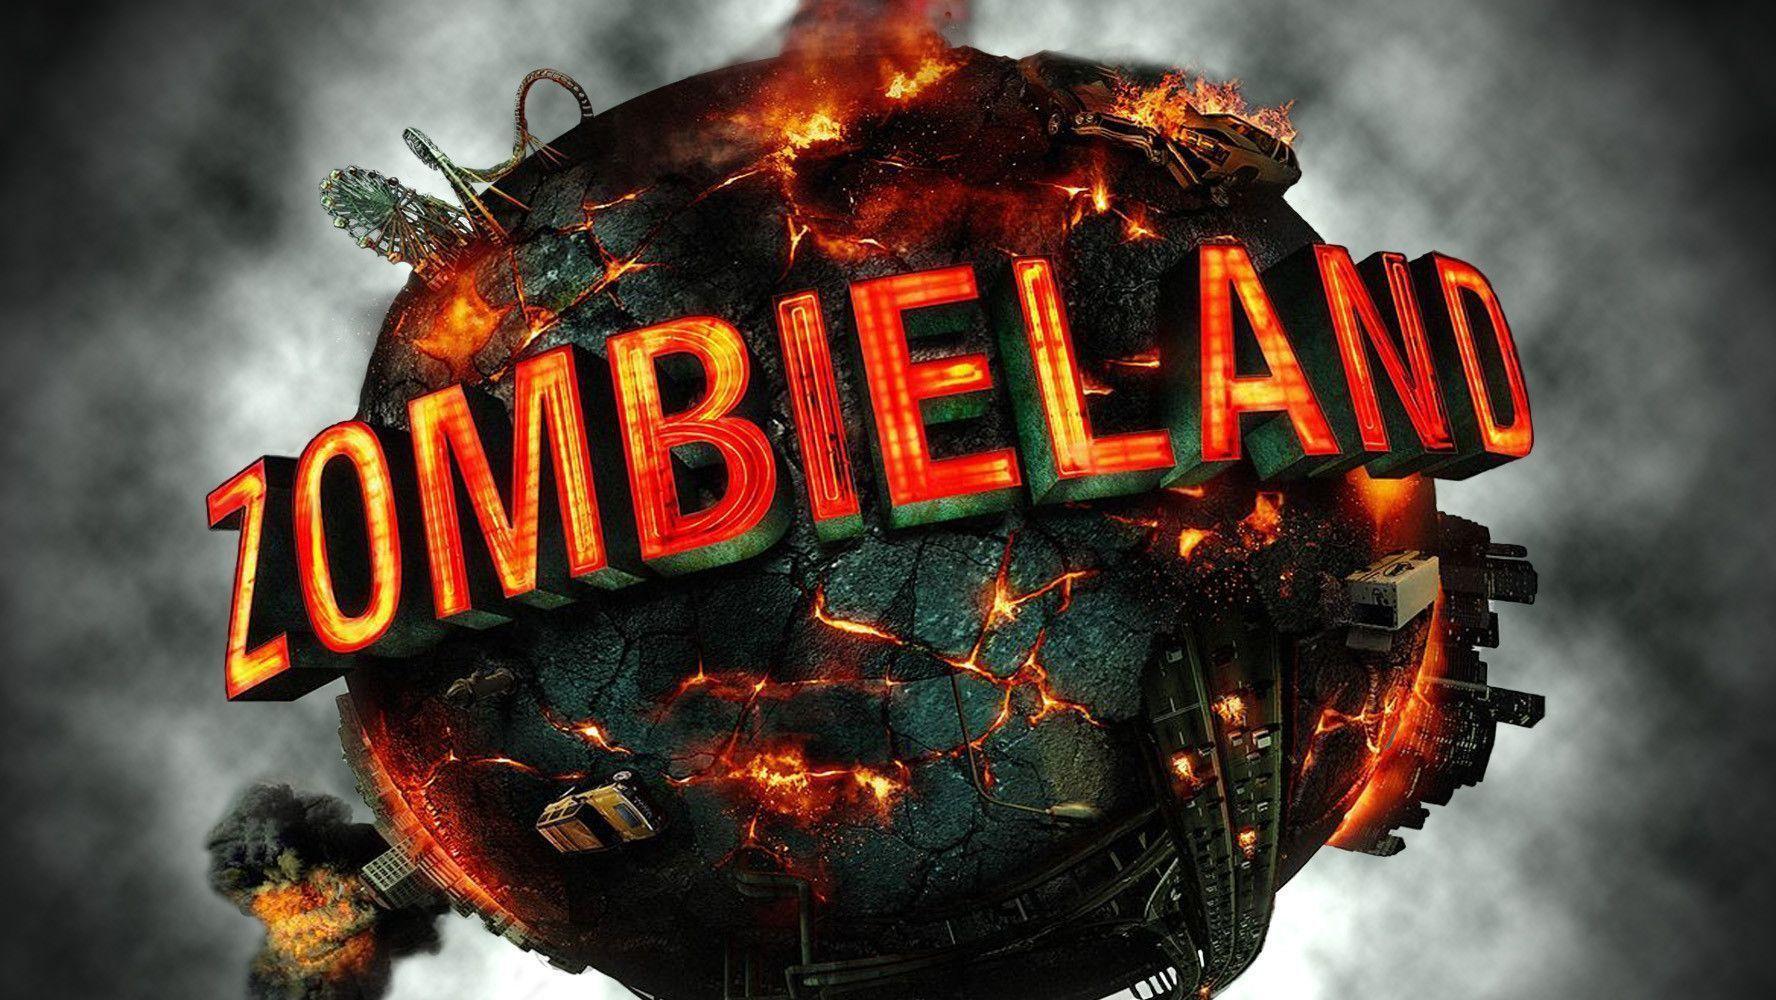 Zombieland Movie Wallpaper Image & Picture